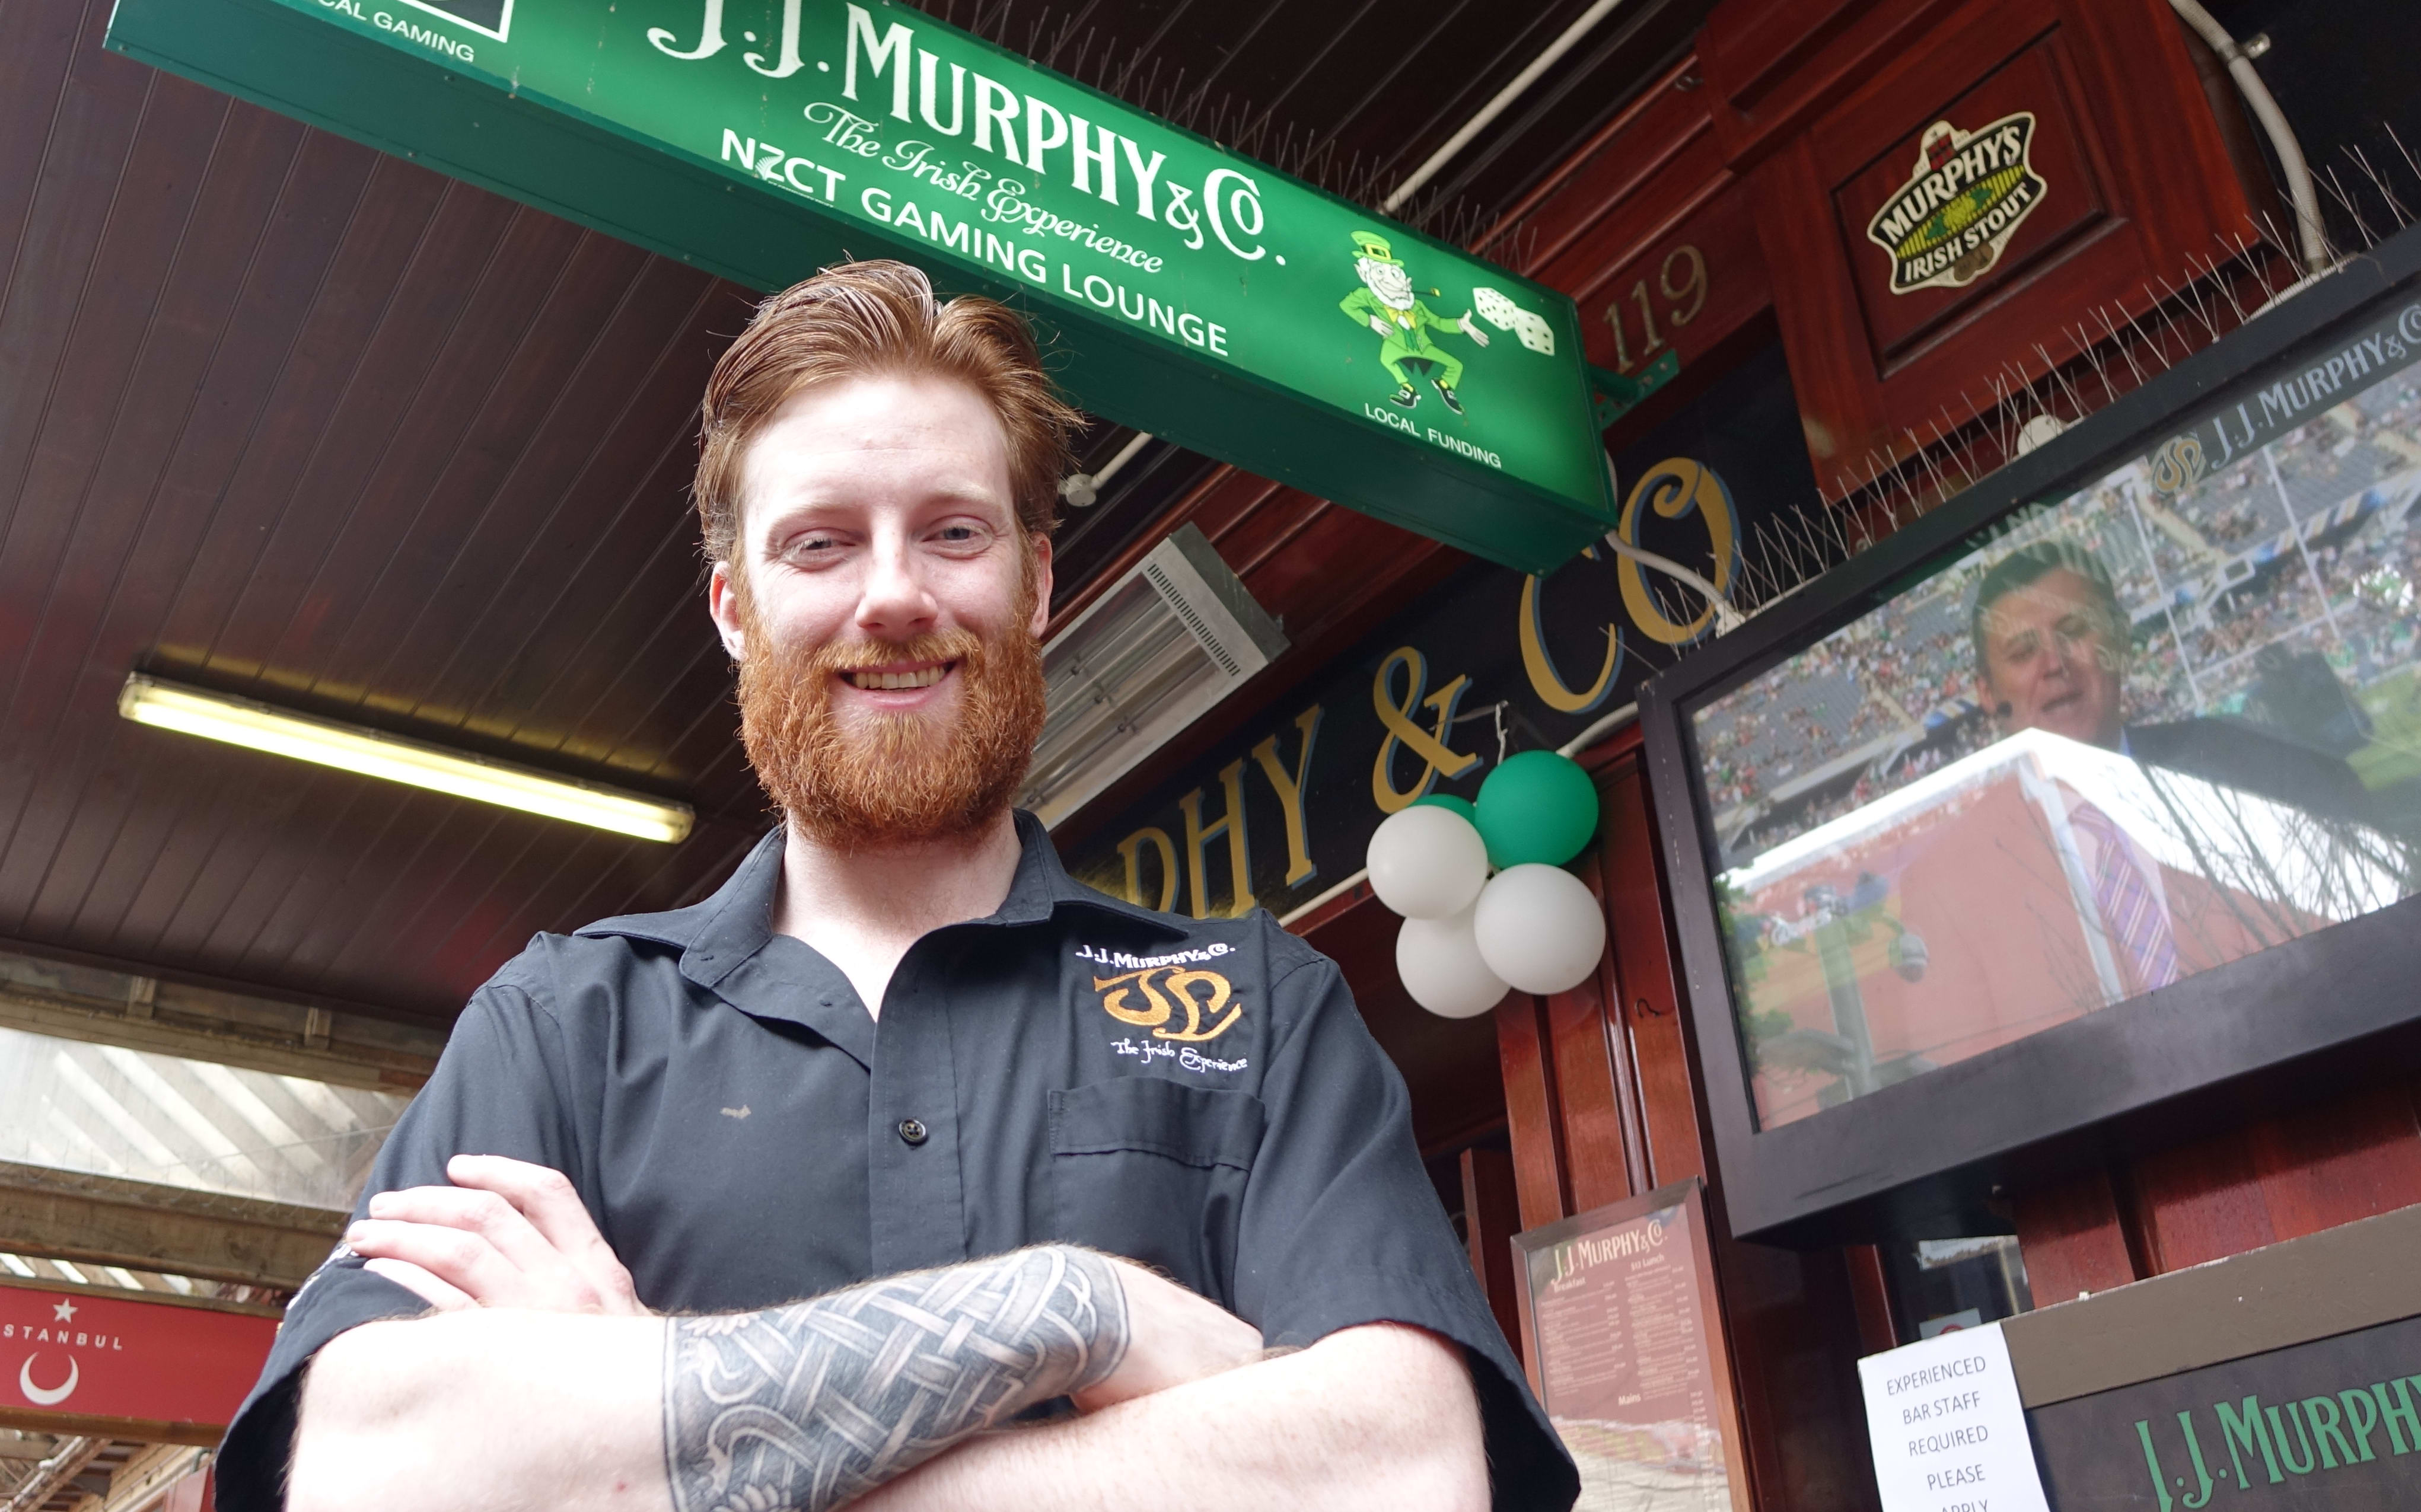 Sean Fox, who owns JJ Murphy's Irish pub in central Wellington, was ecstatic about the Irish victory.